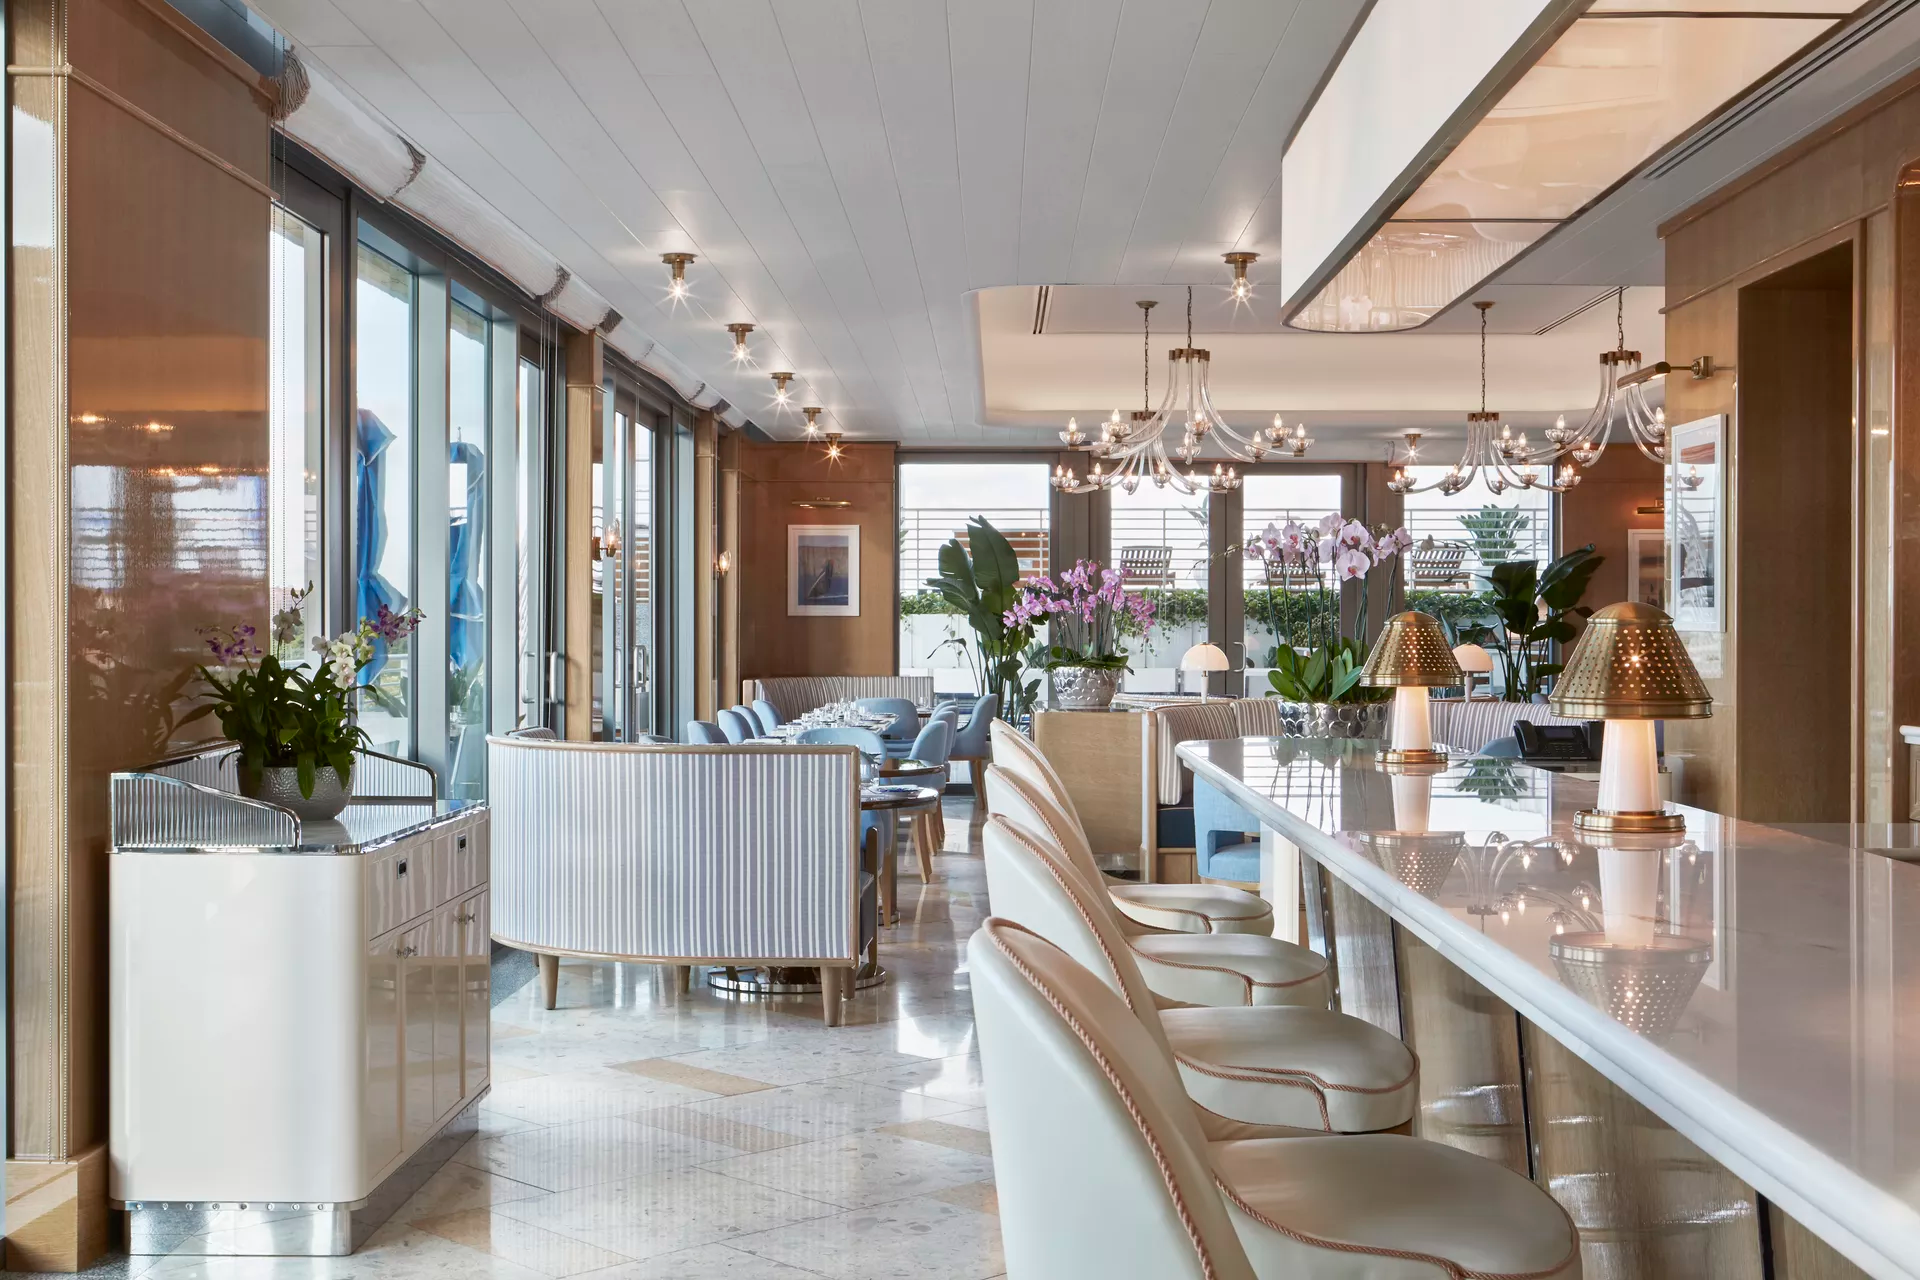 Bellini on the 5th Floor of Mr. C’s Offers Tuscan Delicacies with Biscayne Bay Views